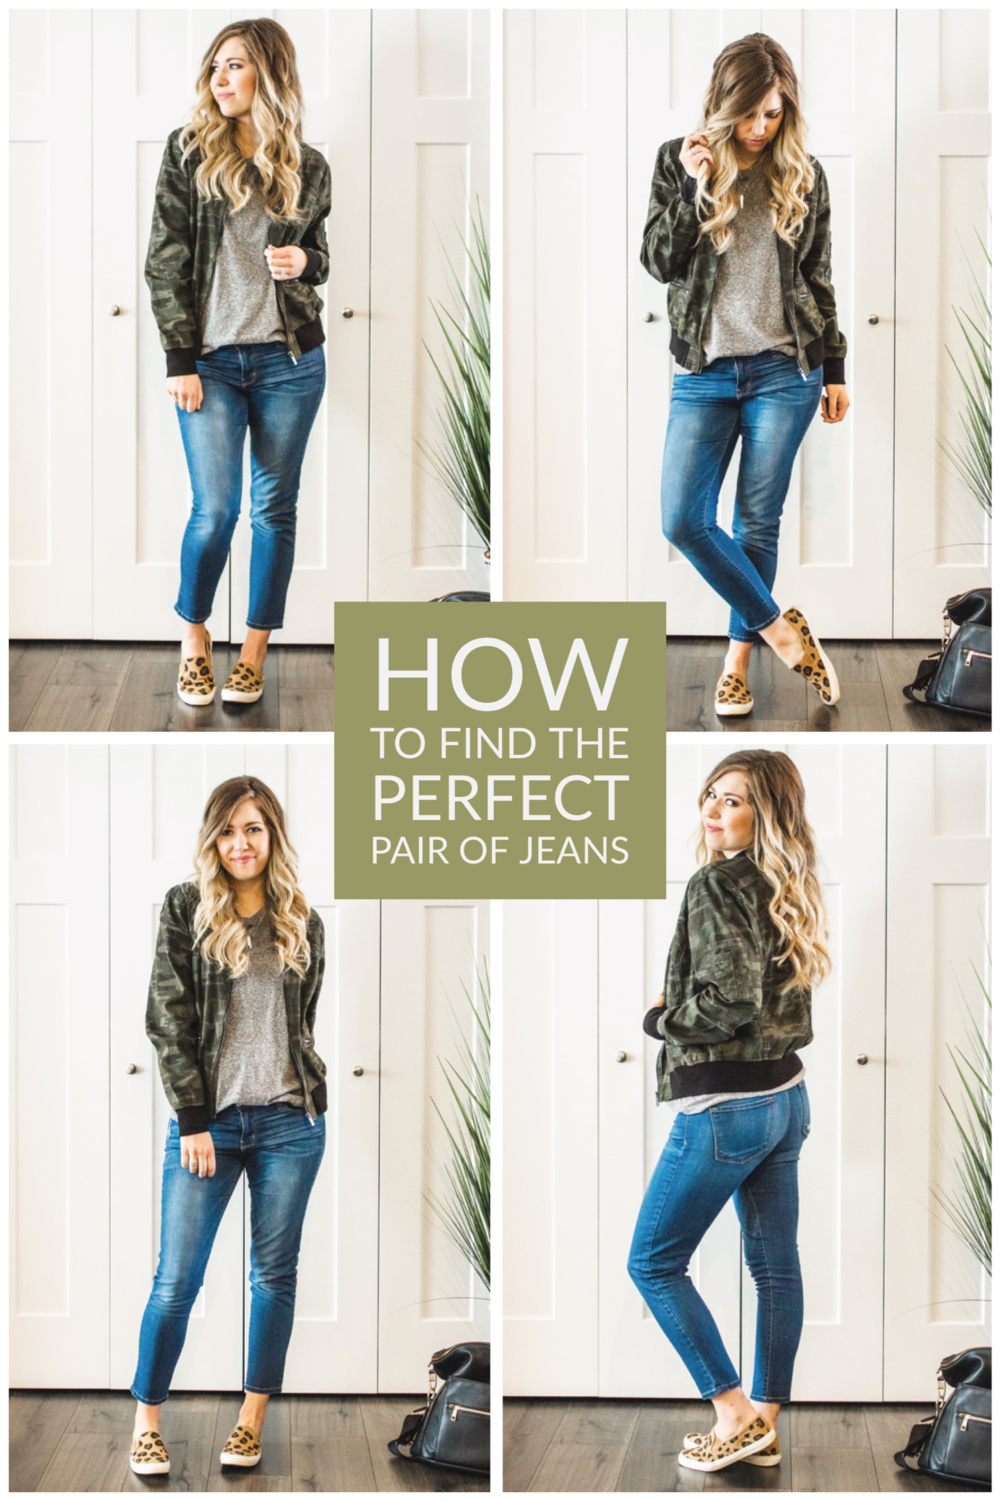 How to Find the Perfect Pair of Jeans — Adrianna Bohrer